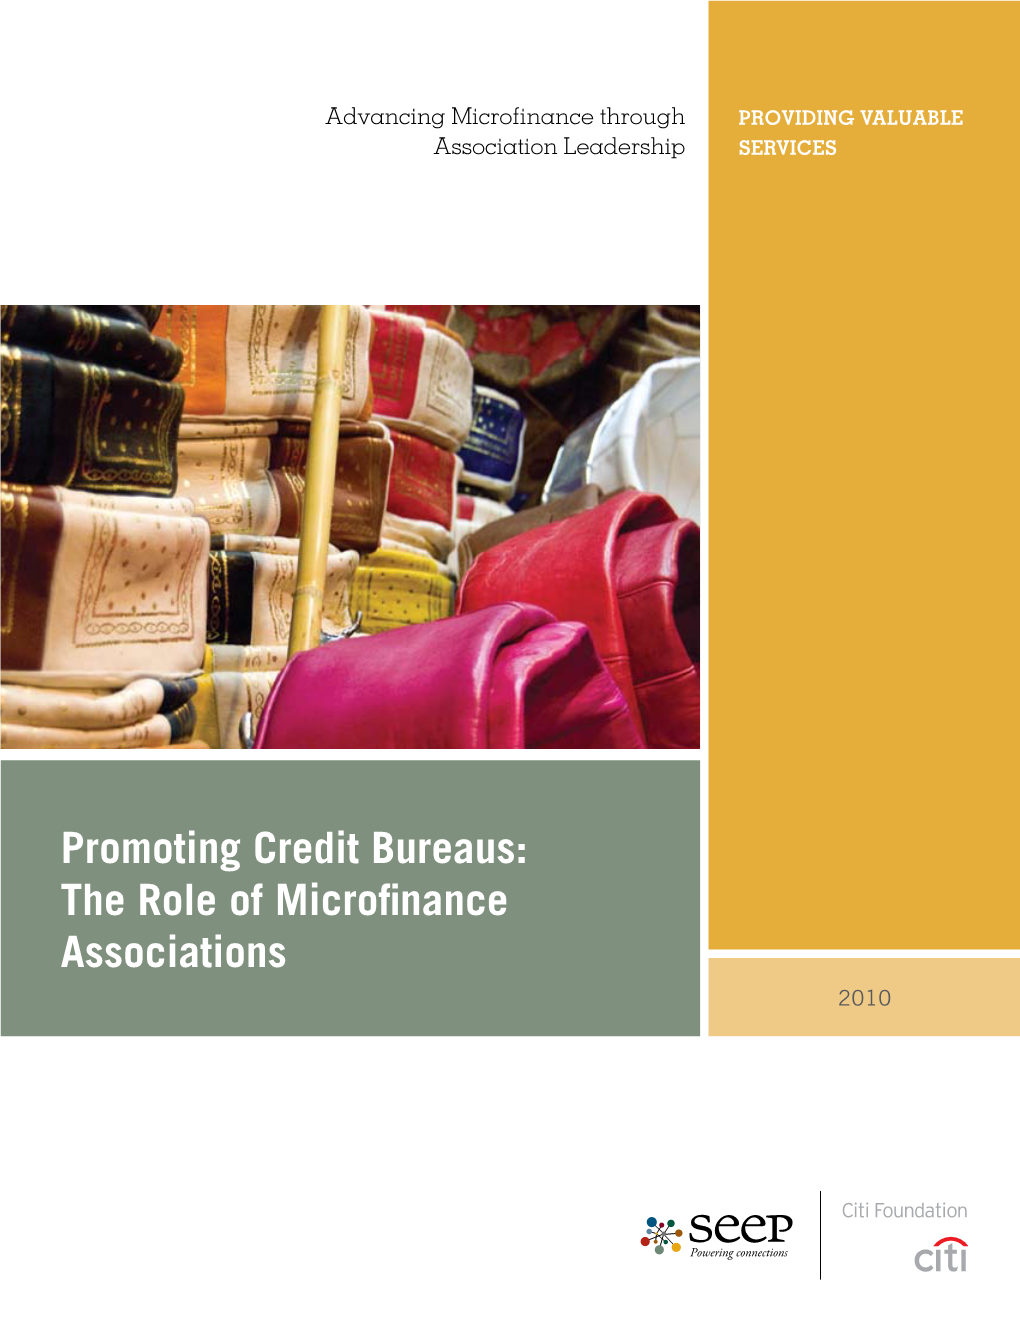 Promoting Credit Bureaus: the Role of Microfinance Associations 2010 Copyright © 2010 the SEEP Network